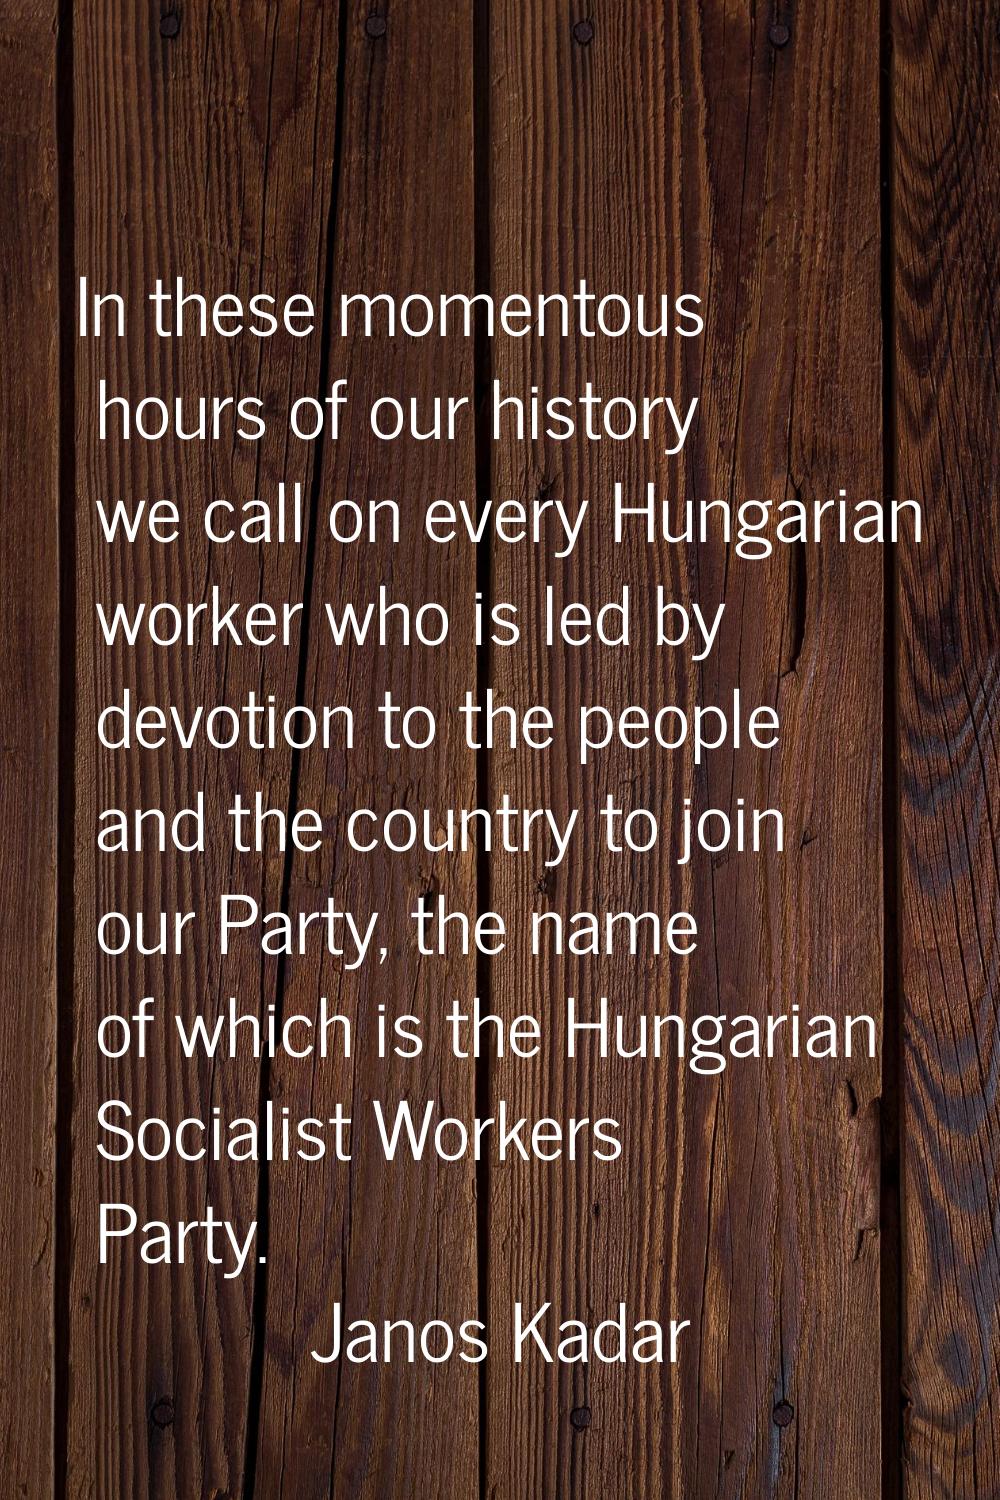 In these momentous hours of our history we call on every Hungarian worker who is led by devotion to